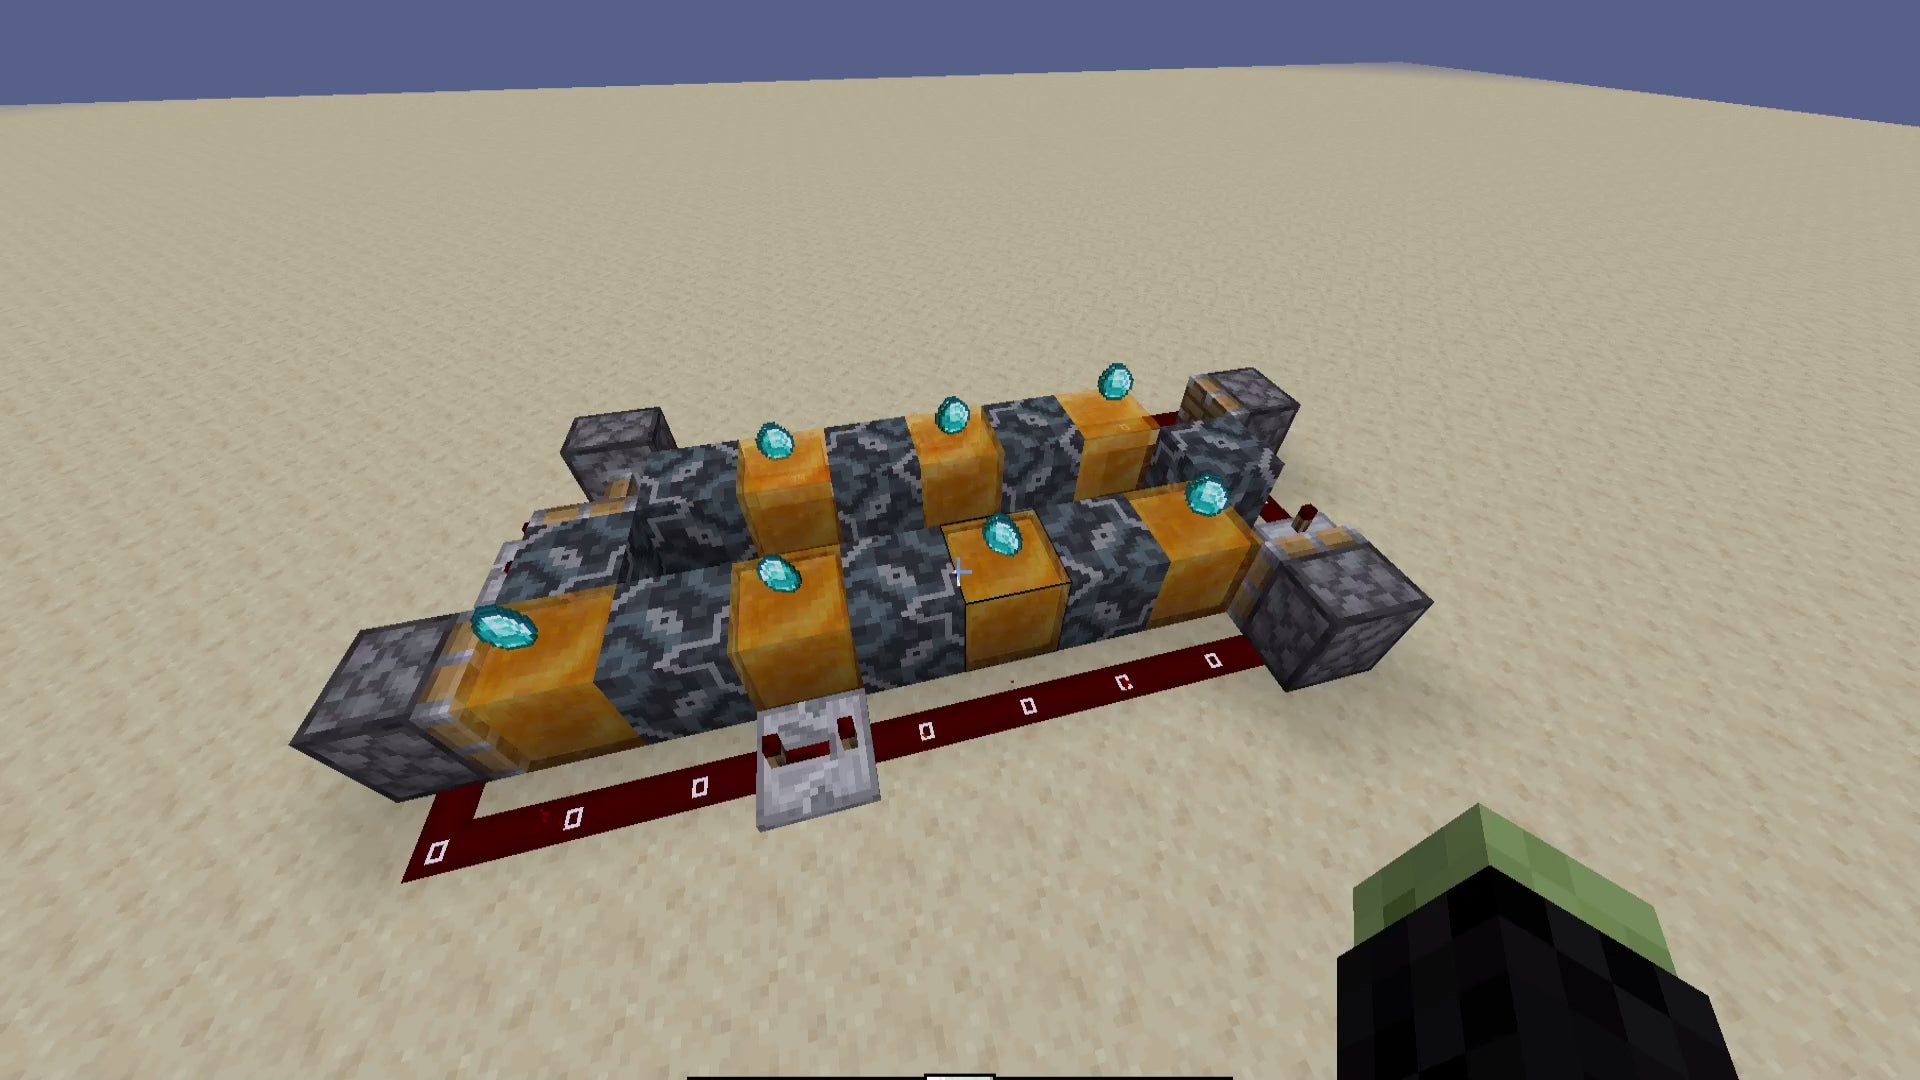 How To Make A Conveyor Belt In Minecraft